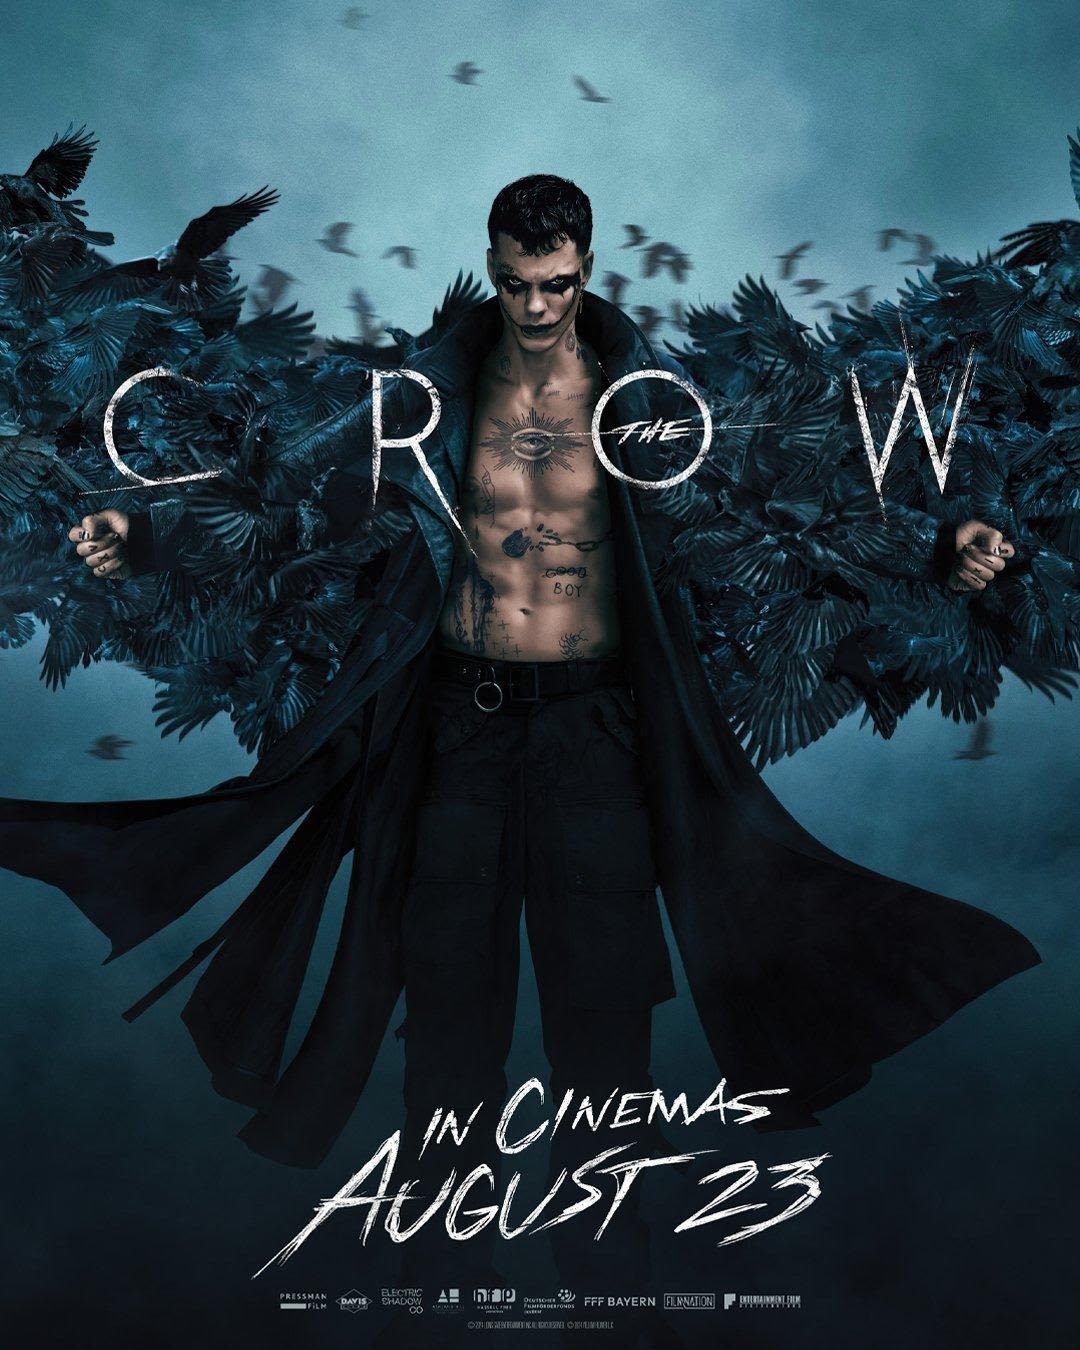 The Crow Reboot Gets a New Poster